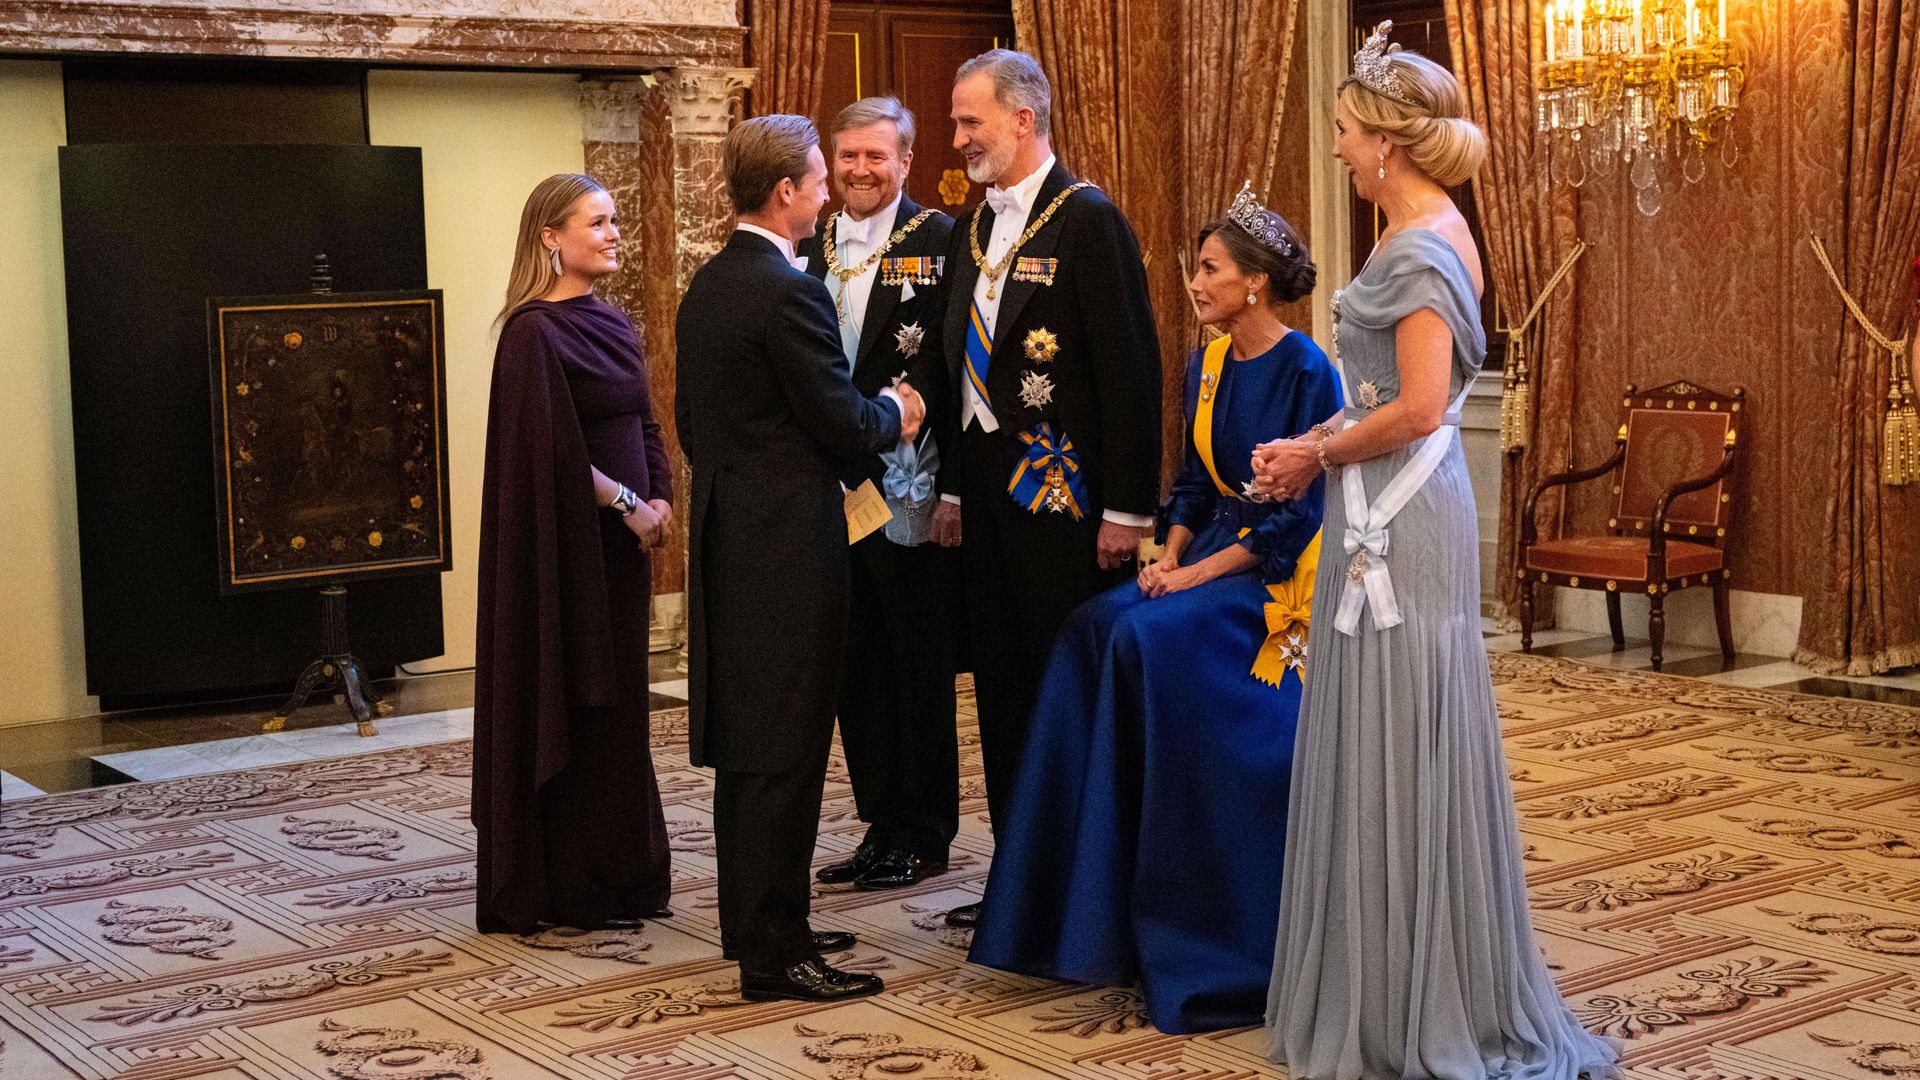 Queen Letizia forced to greet royal guests at state banquet sitting down - reason revealed